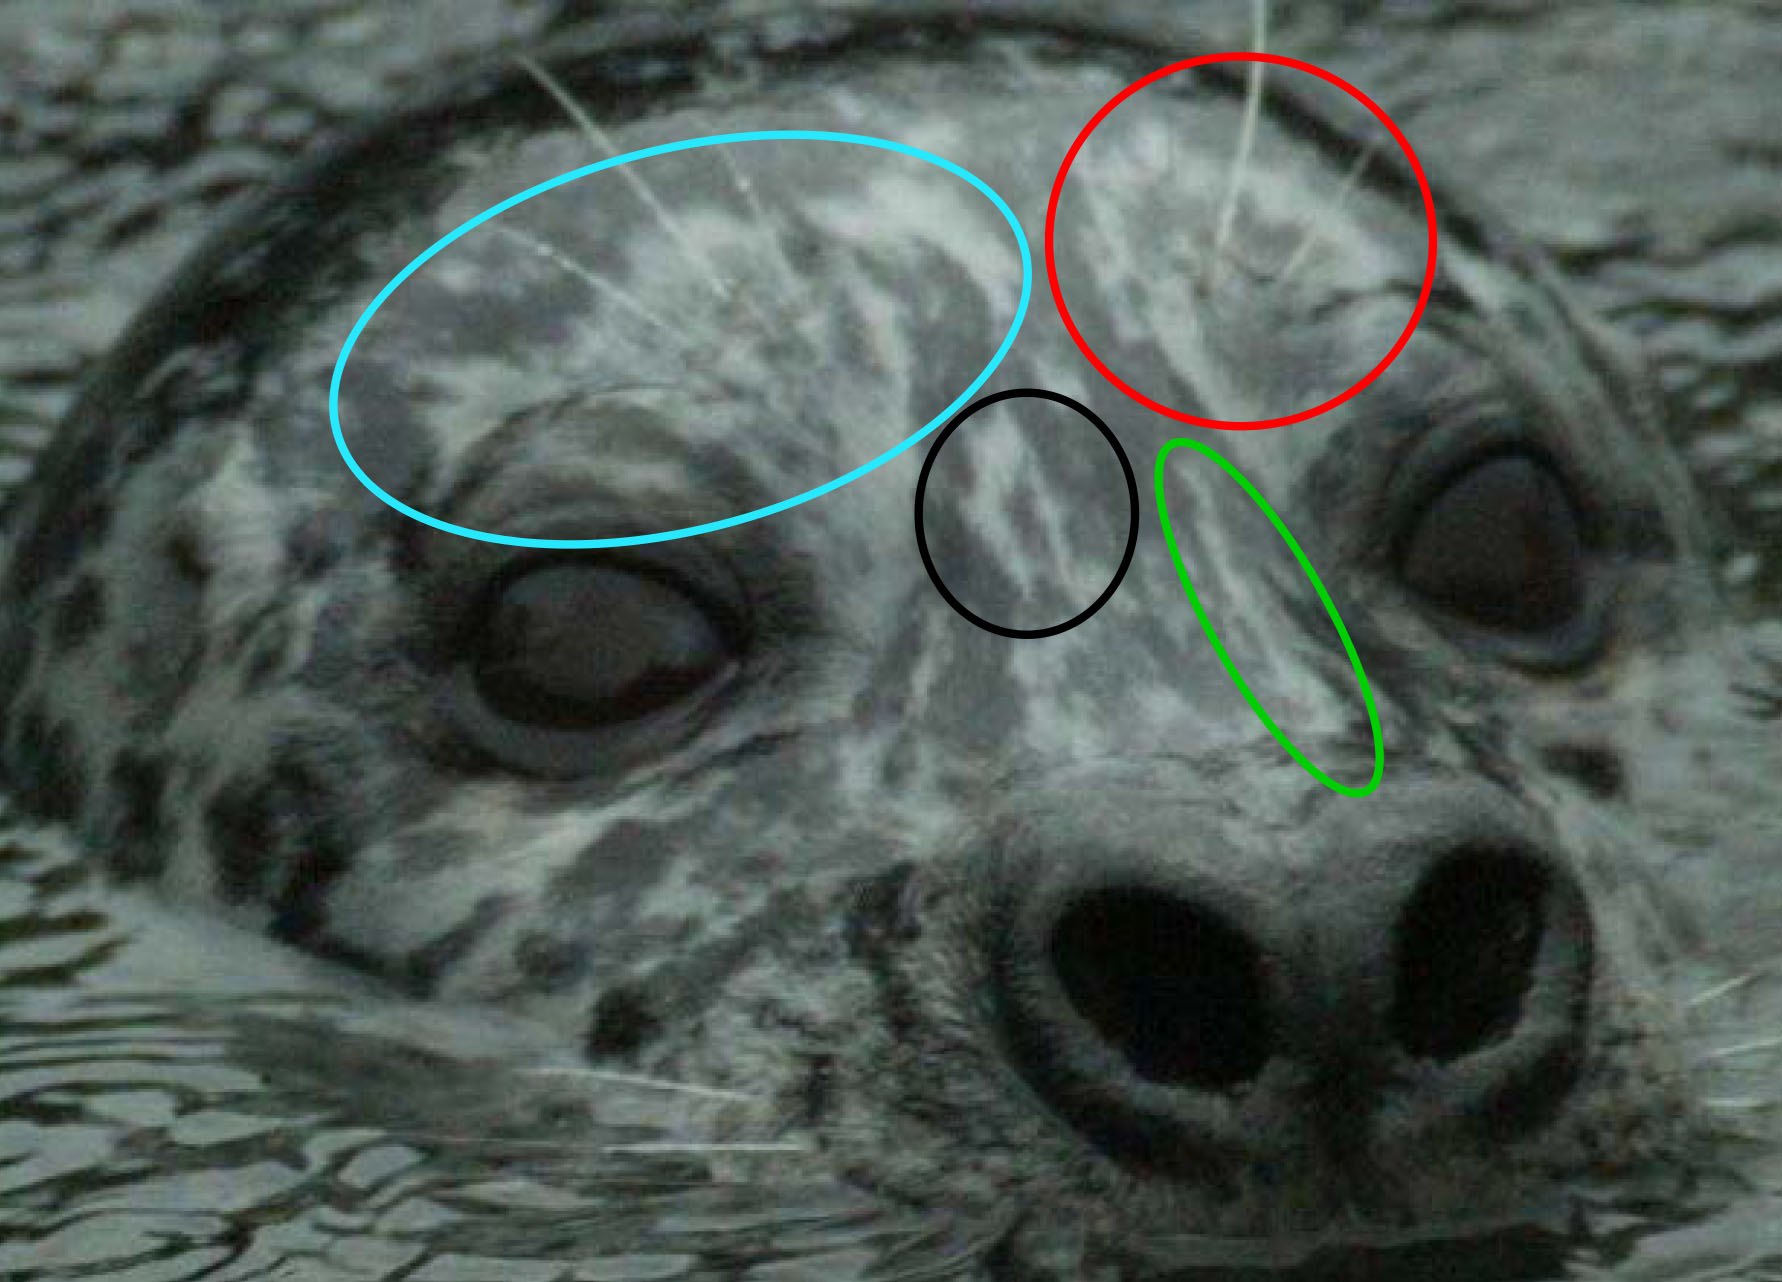 The head of a harbor seal in the water facing forward with various spotting patterns circled in different colors.